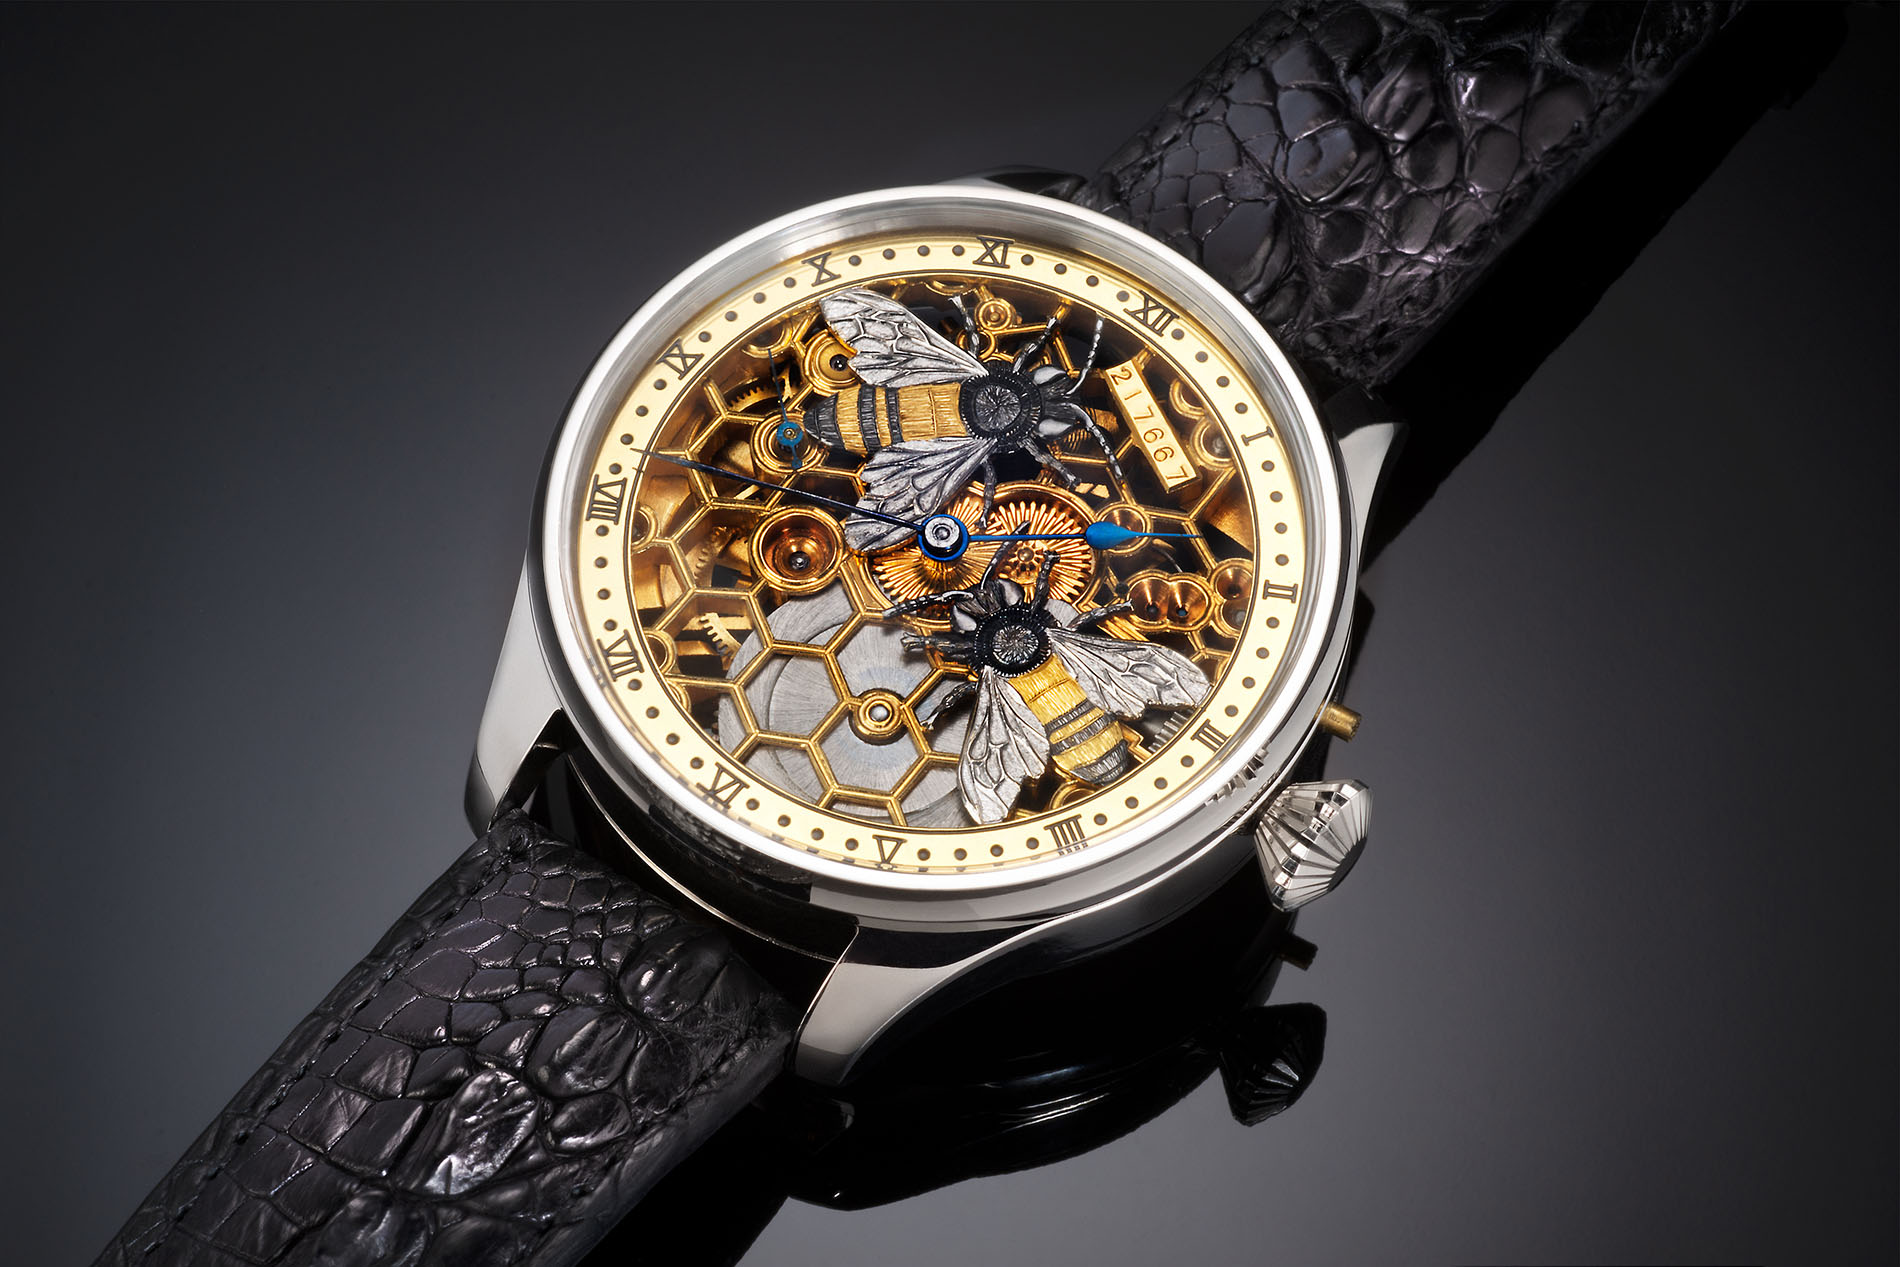 Carlos Montanaro, Honeycomb Watch (2021). Refabricated vintage timepiece. Dimensions: 48 mm w x 14 mm d. ©2021 Rewind Jewelry. Courtesy of the artist.